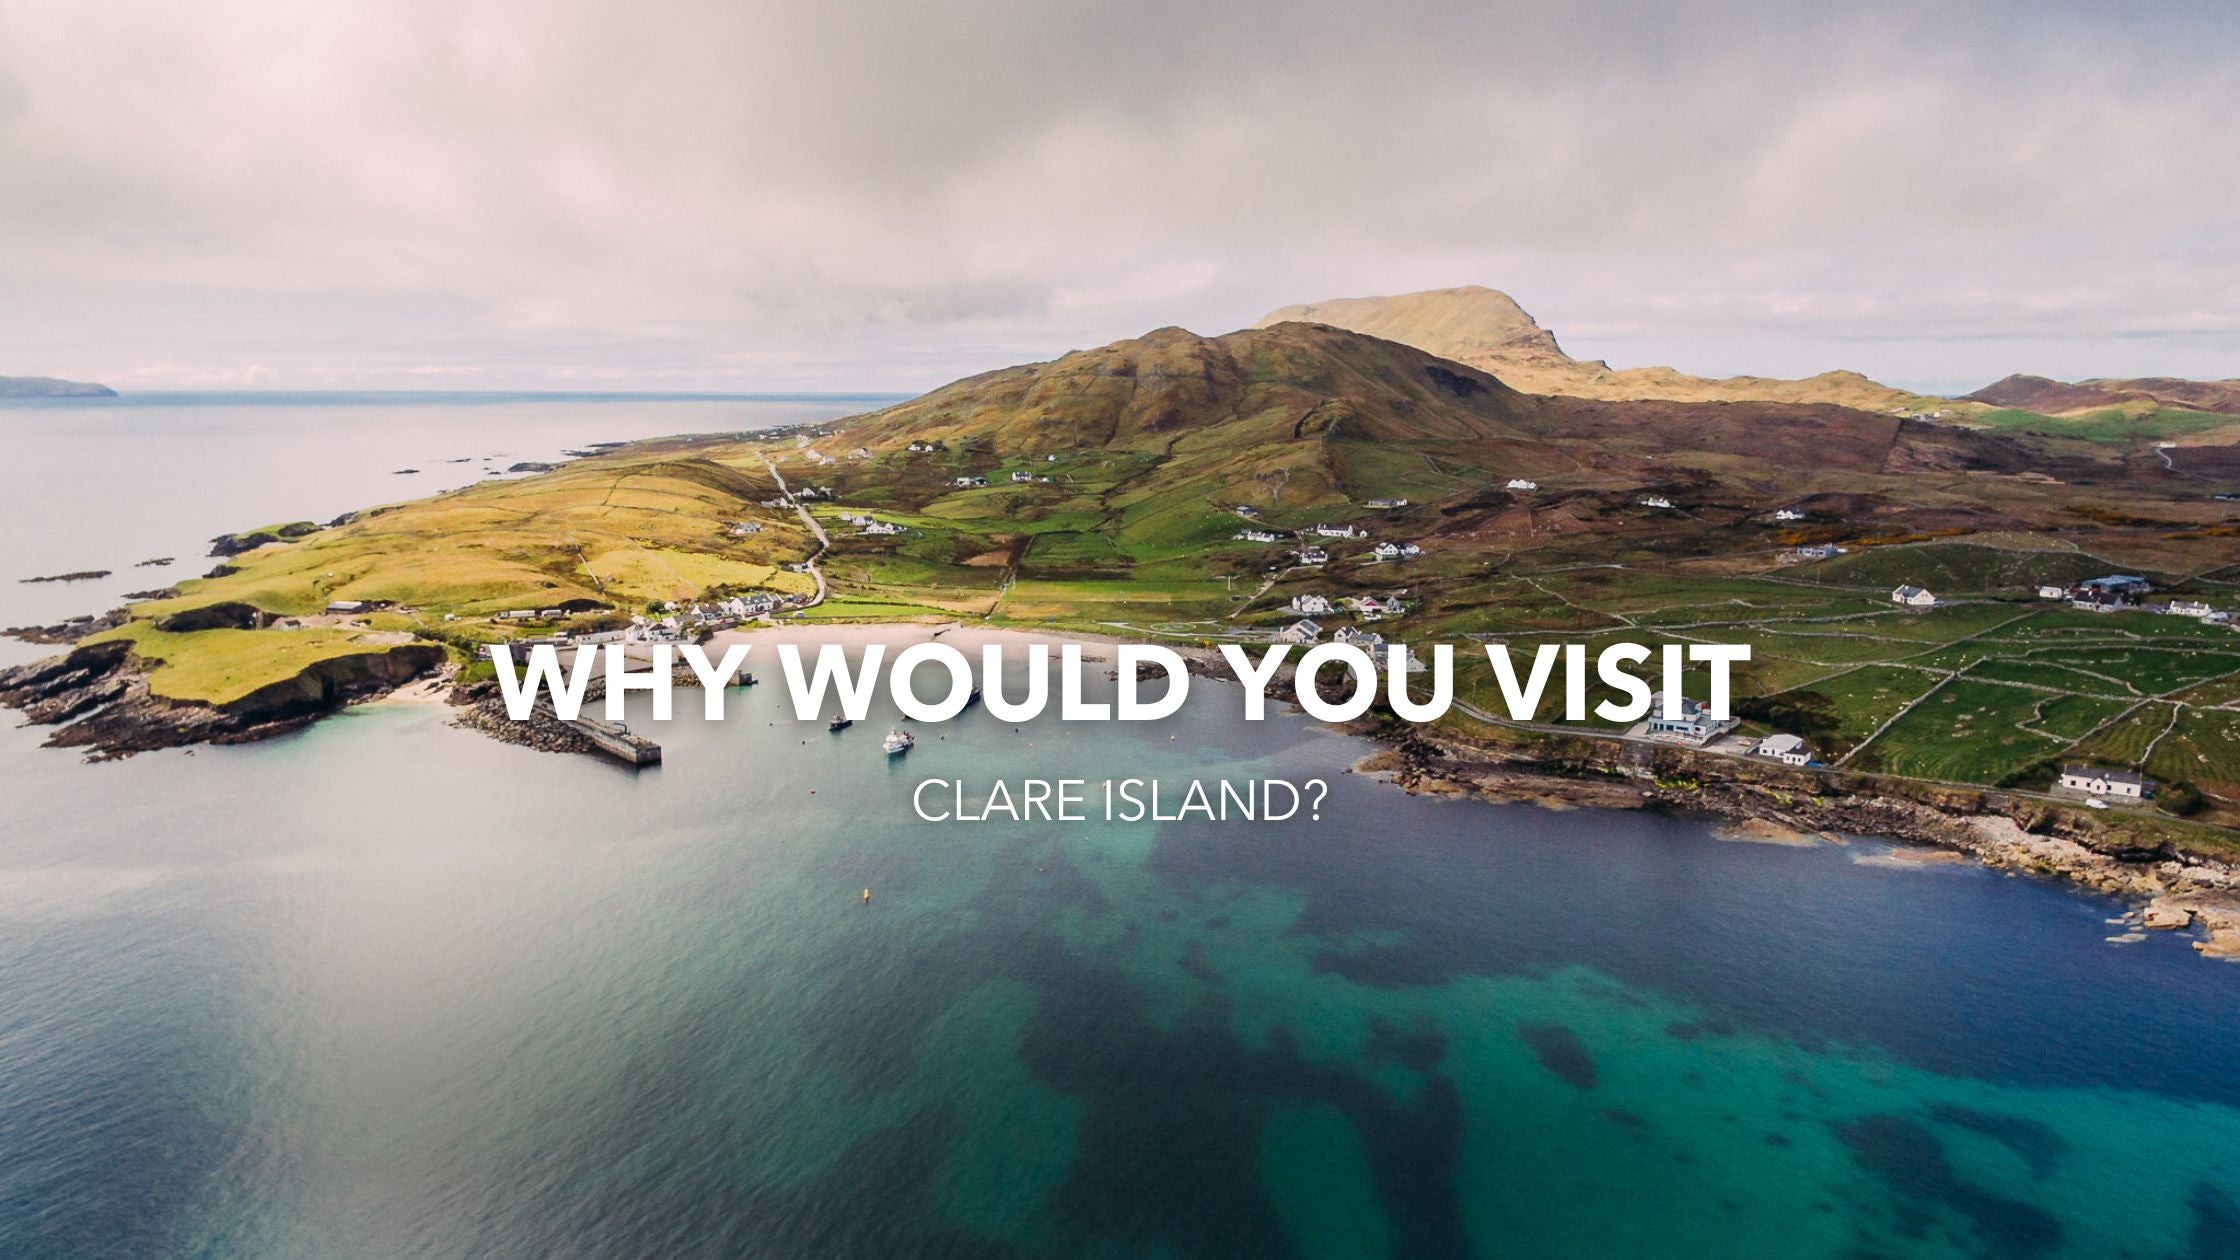 Aerial view of Clare Island Co. Mayo care of https://www.clareisland.ie/